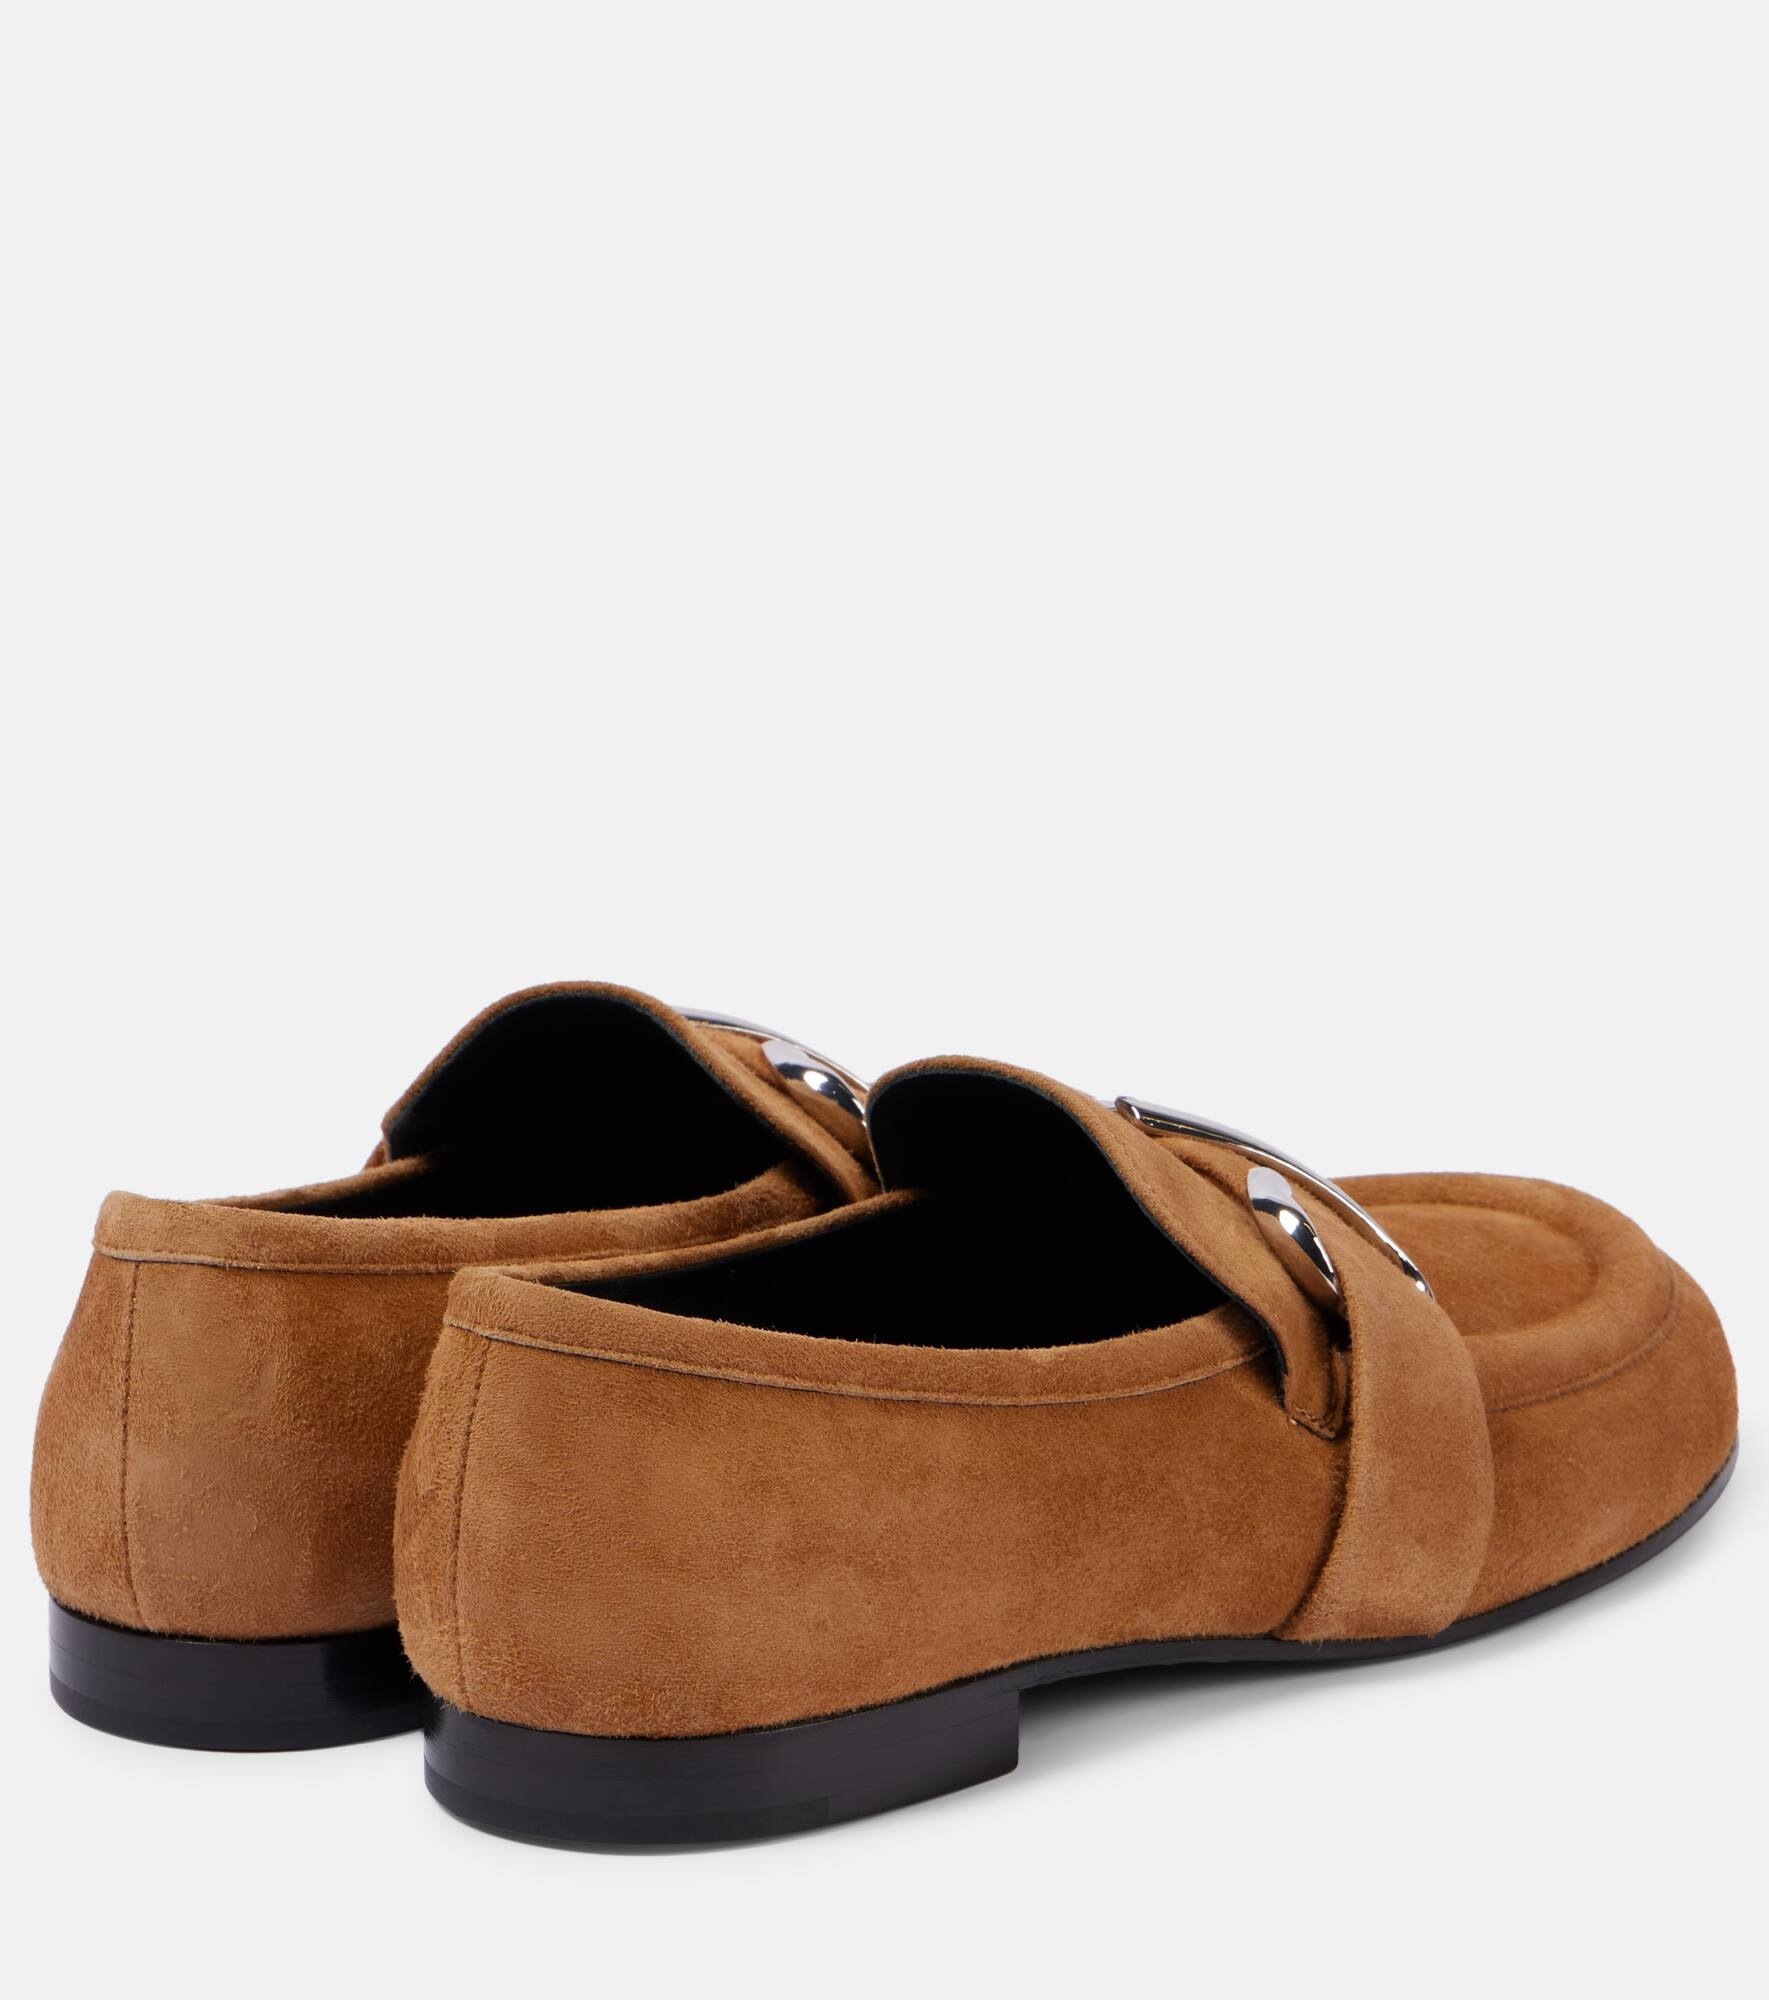 Monogram suede loafers - 3